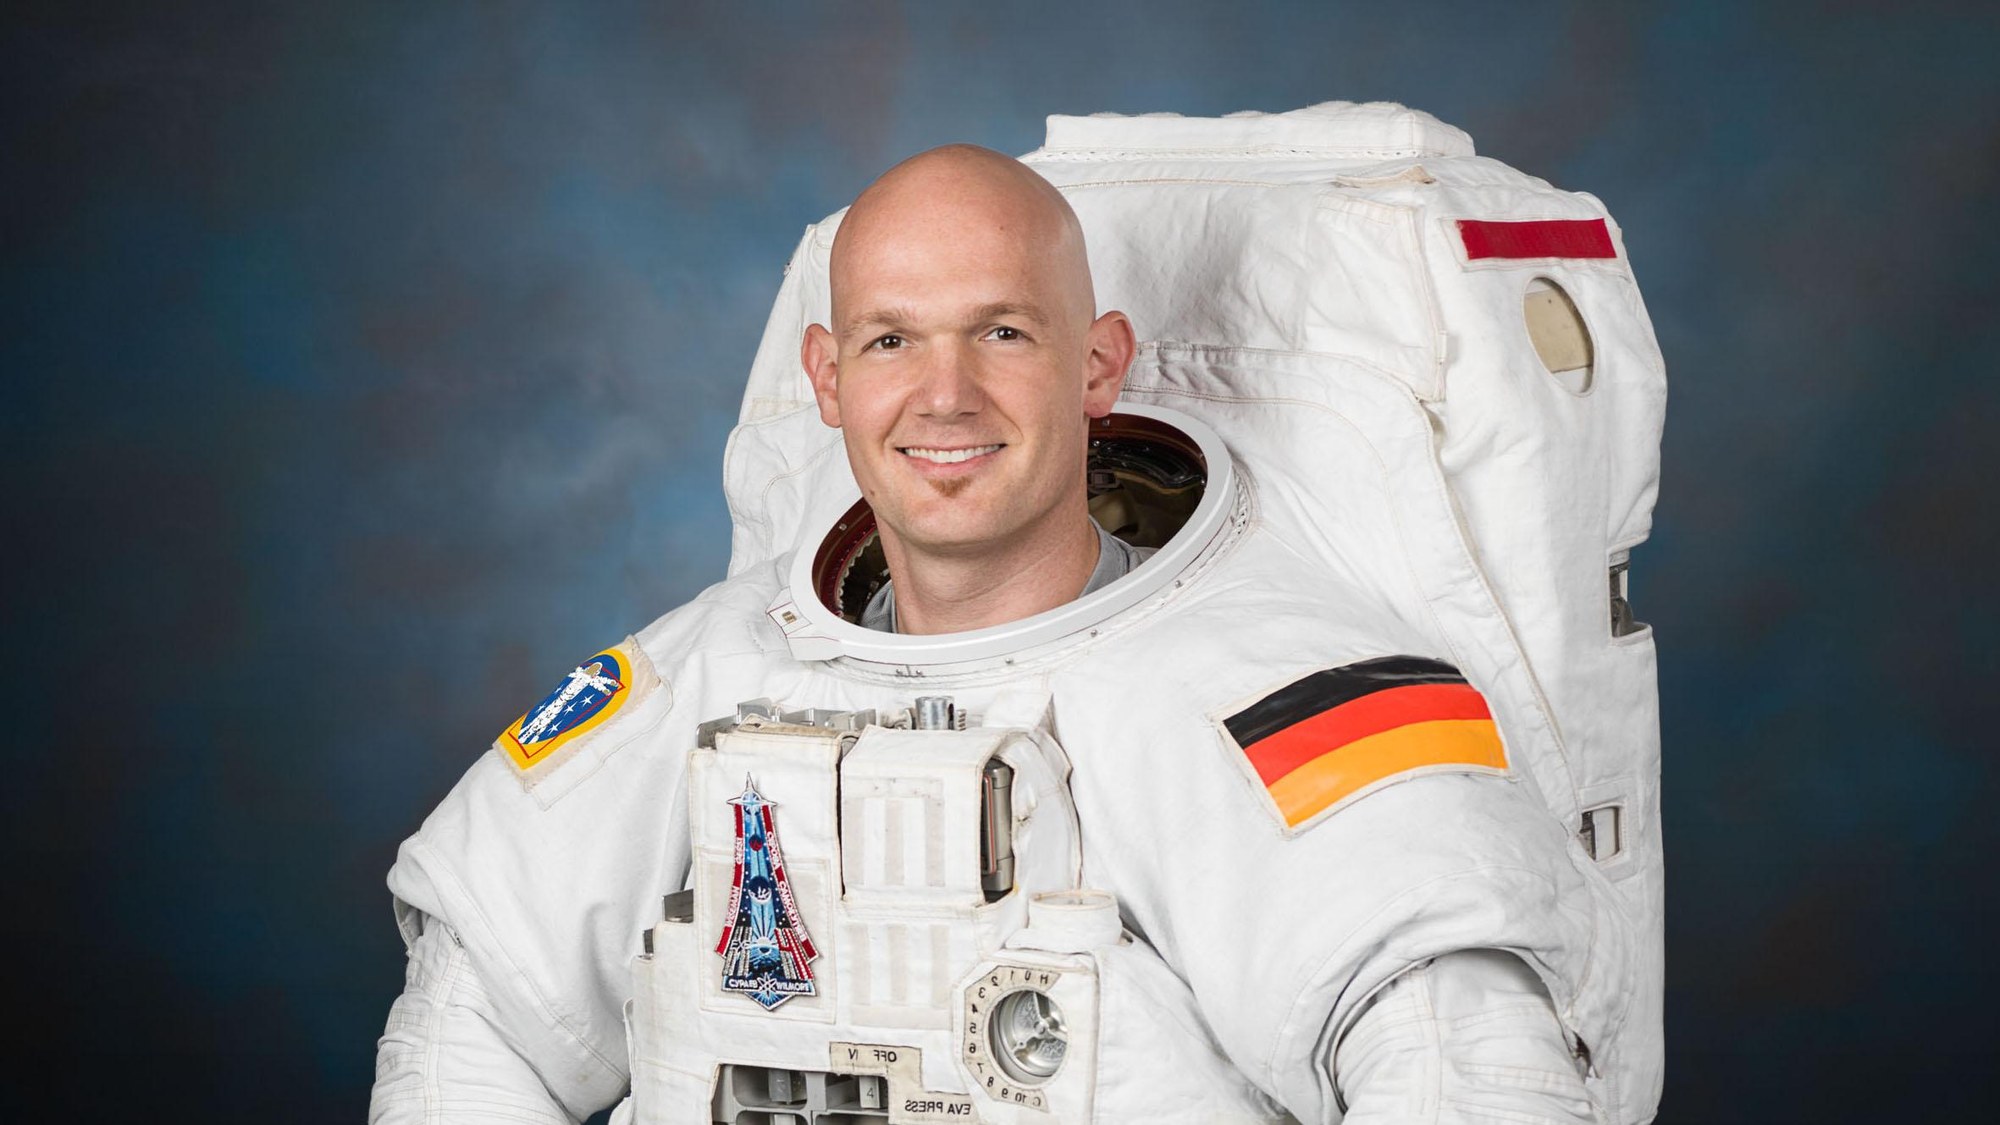 The Blue Dot mission in space – Alexander Gerst